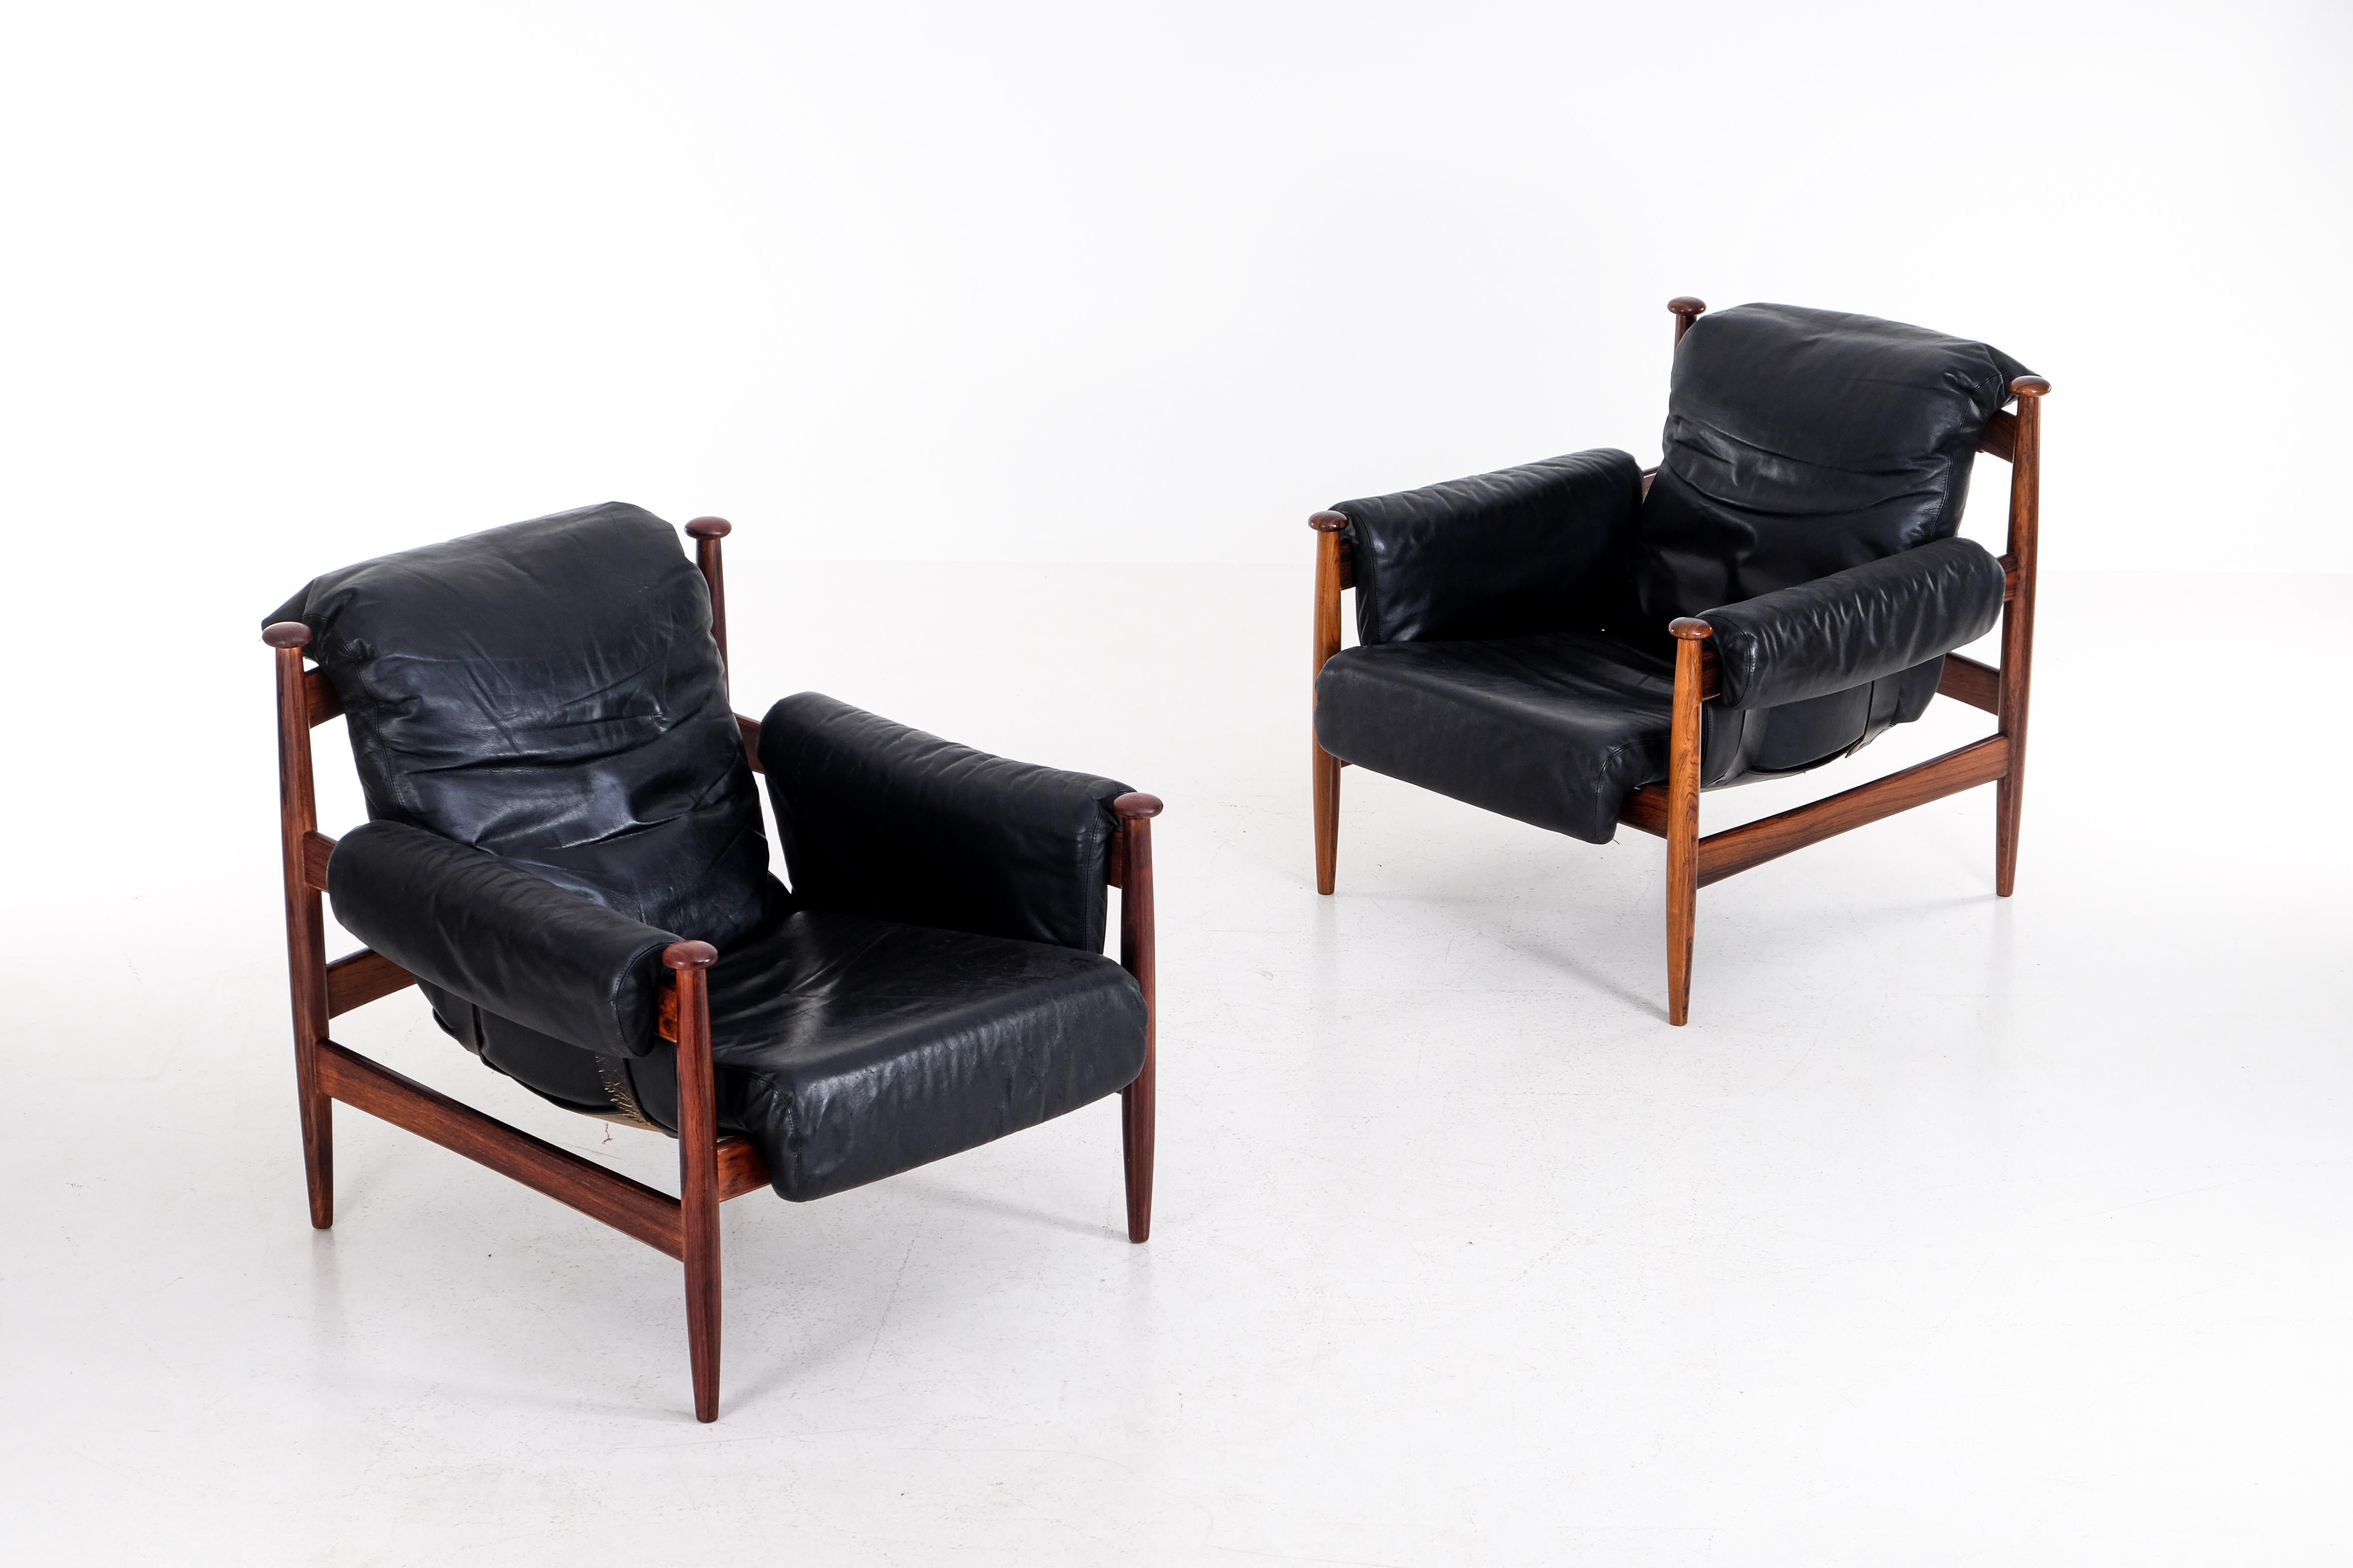 Original black leather, model Amiral. Produced in the 1960s by IRE möbler in Skillingaryd, Sweden.
      